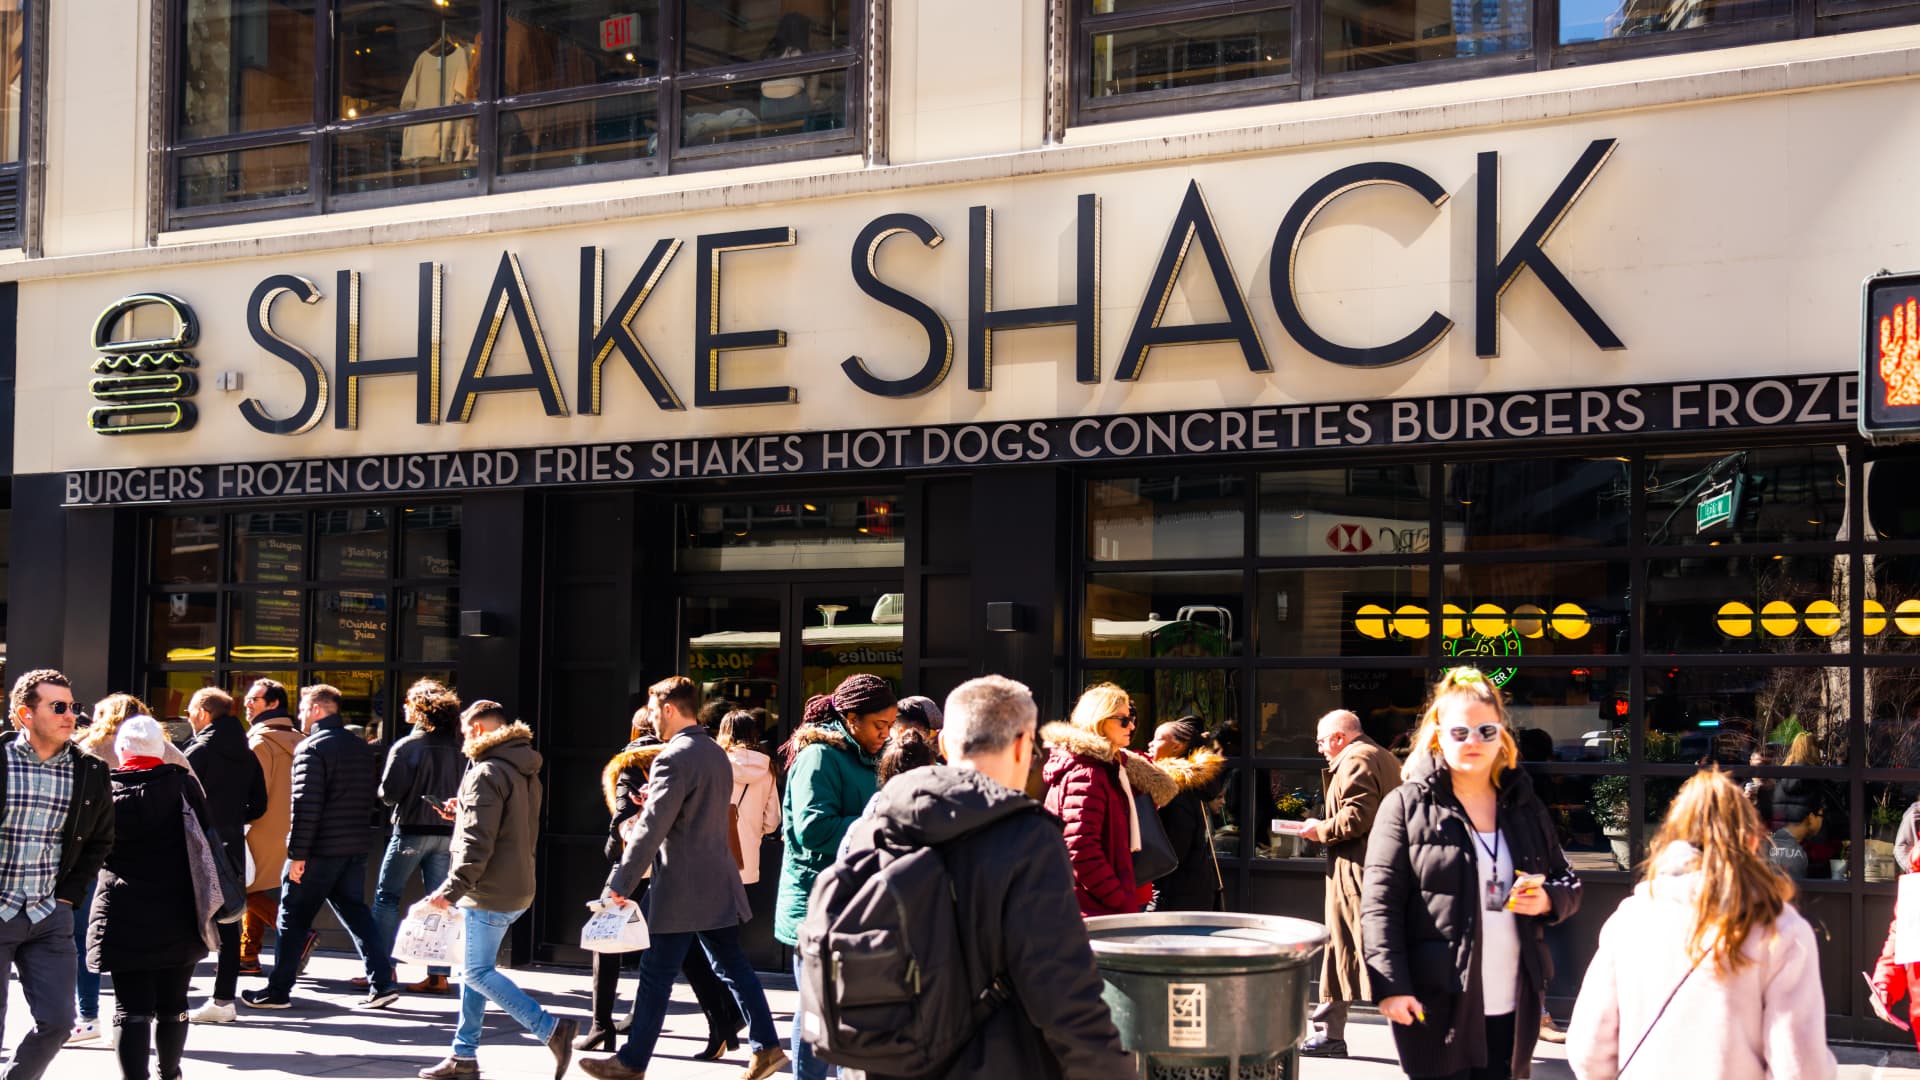 Shake Shack’s recent deal with Engaged Capital may have fallen short for shareholders